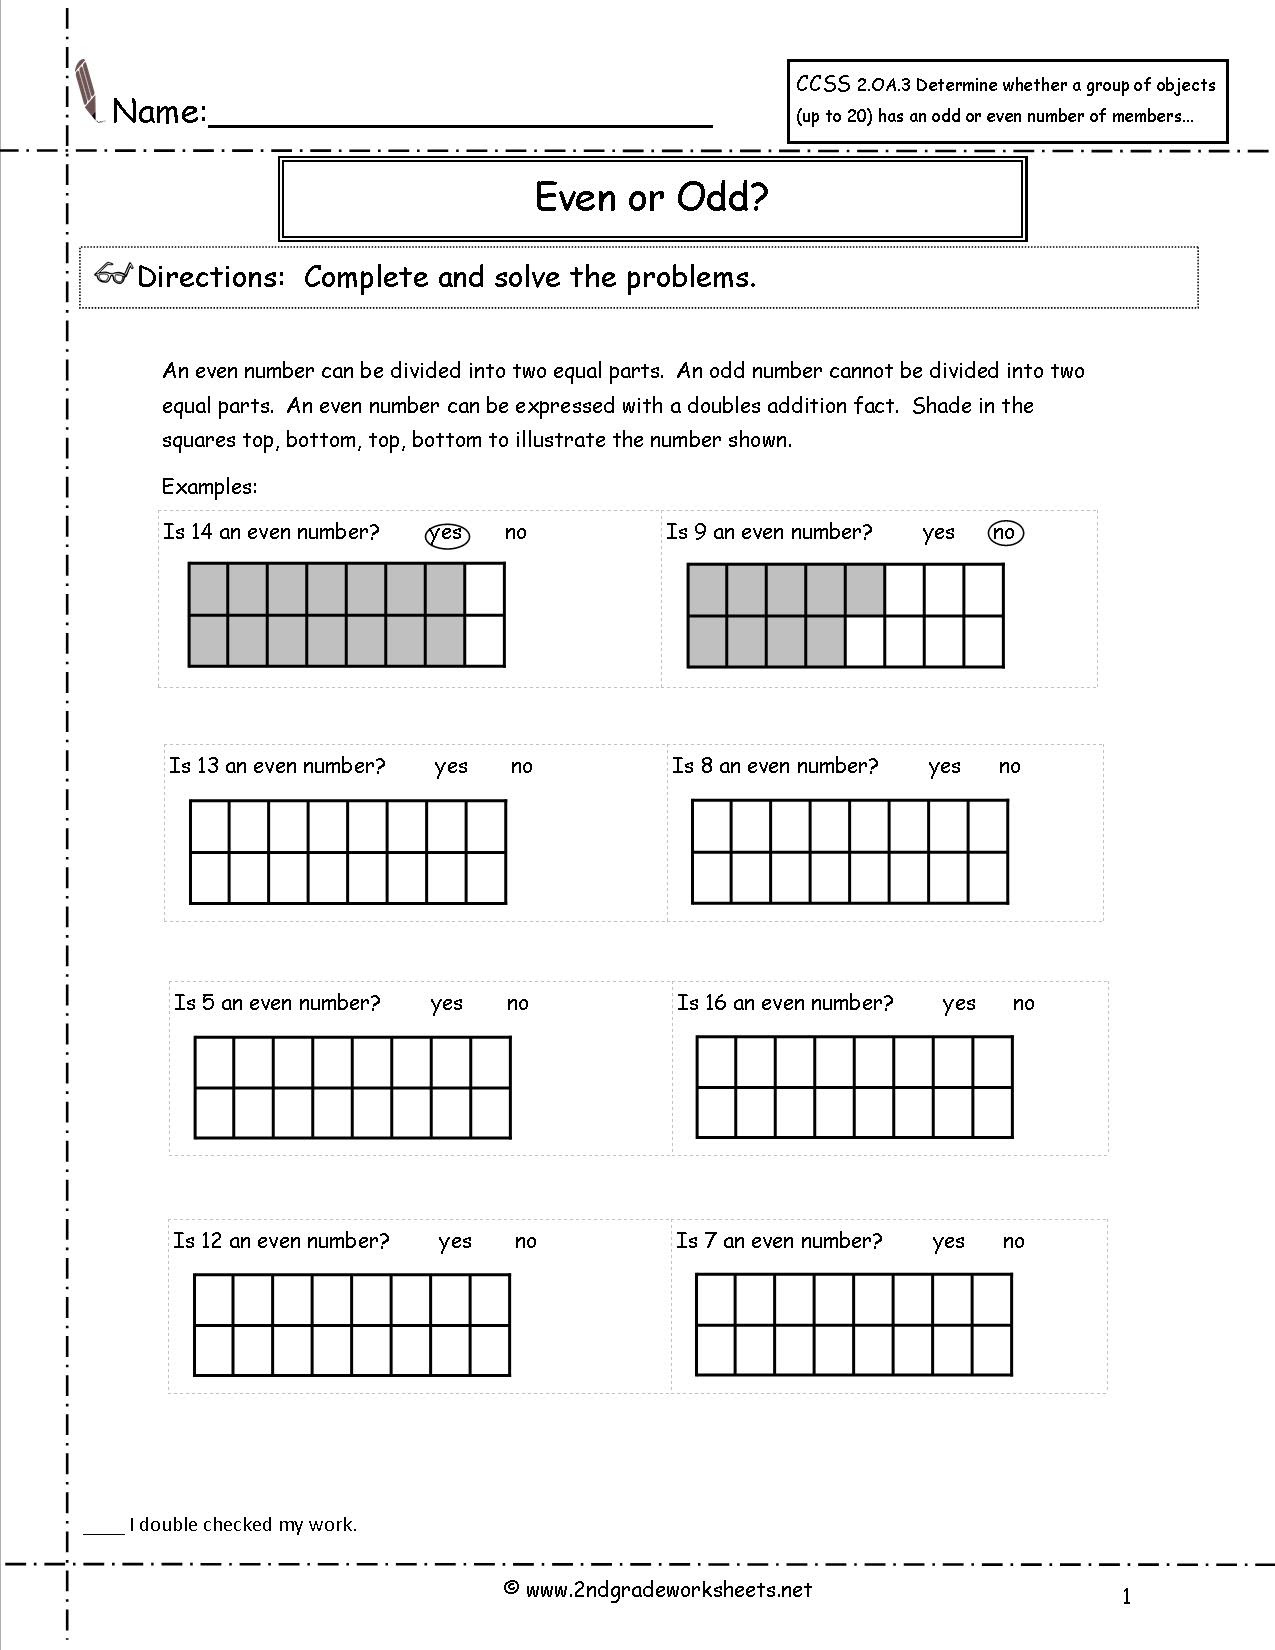 common-core-worksheets-3rd-grade-edition-create-teach-share-worksheet